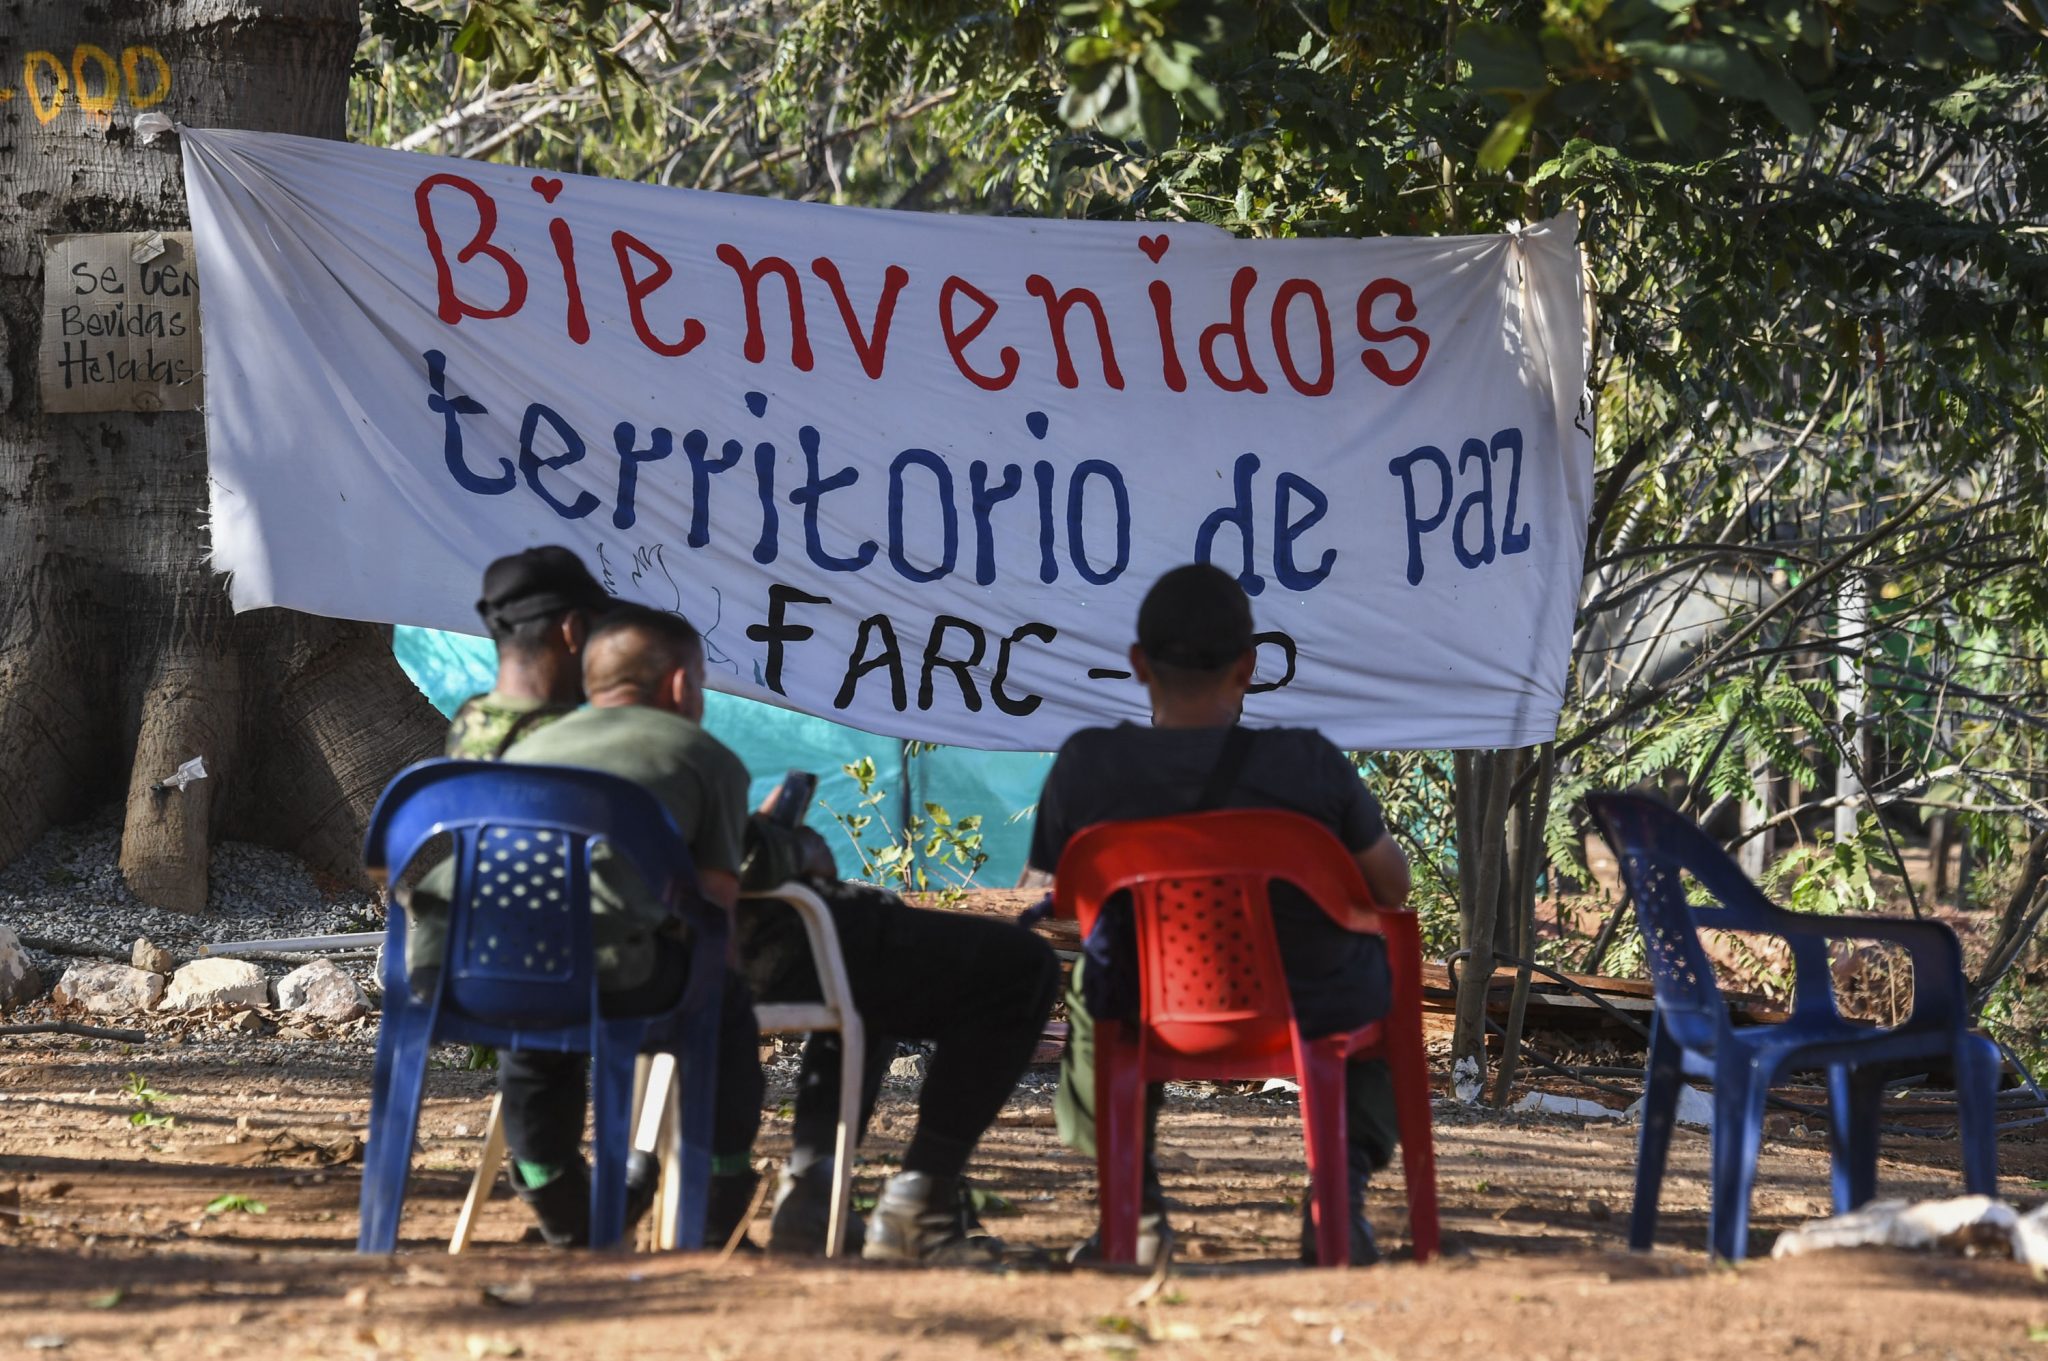 Members of the FARC leftist guerrilla rest at the entrance to the area where the rebels are gathering in the municipality of San Jose de Oriente, Cesar department, northern Colombia on February 28, 2017. The initial phase of the FARC disarmament process, which includes making an inventory of weapons and destroying unstable munitions, begins on March 1 according to the timetable agreed in the peace pact between the rebels and the government in November 2016.  / AFP PHOTO / Luis Acosta